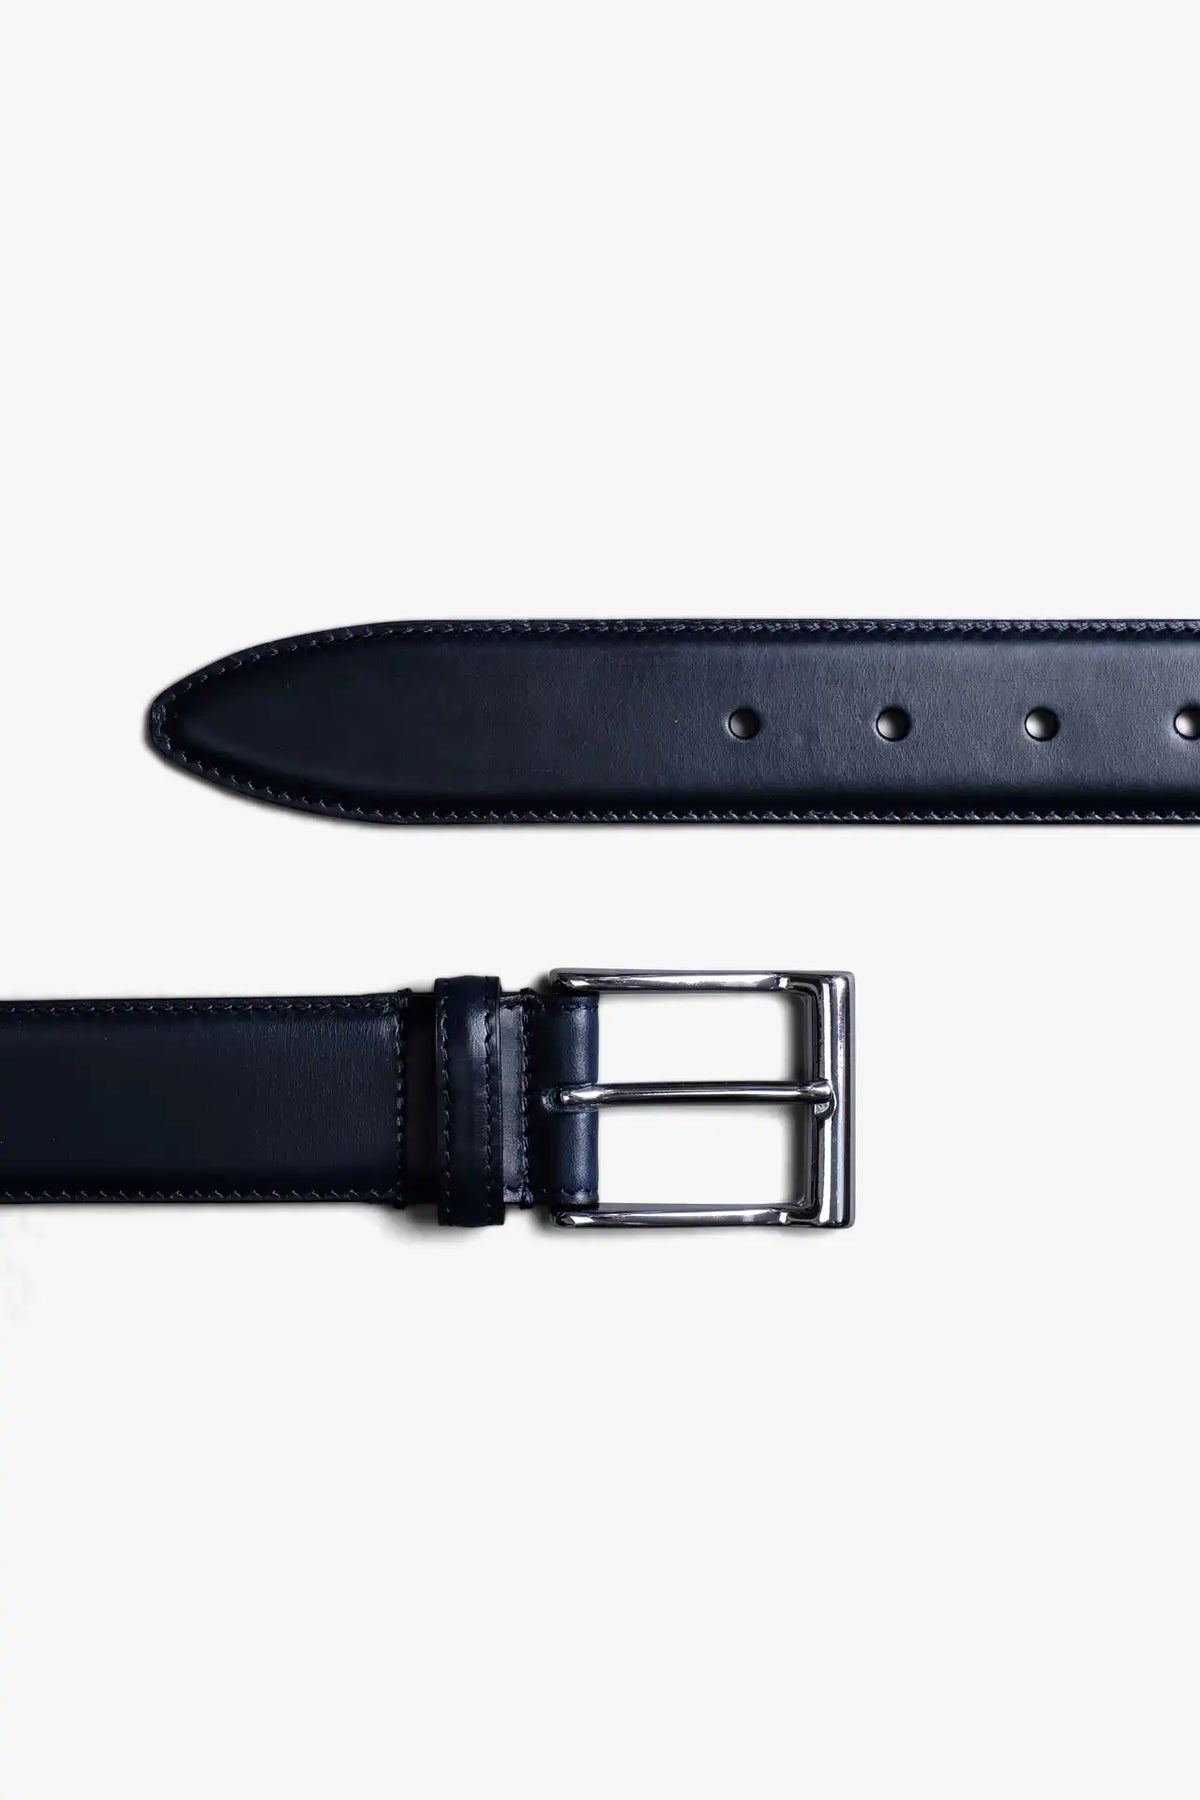 Navy Midnight Blue Leather Belt in minimalist design, Made in Italy from vegetable tanned leather. Perfect to match with hand made dress shoes. 